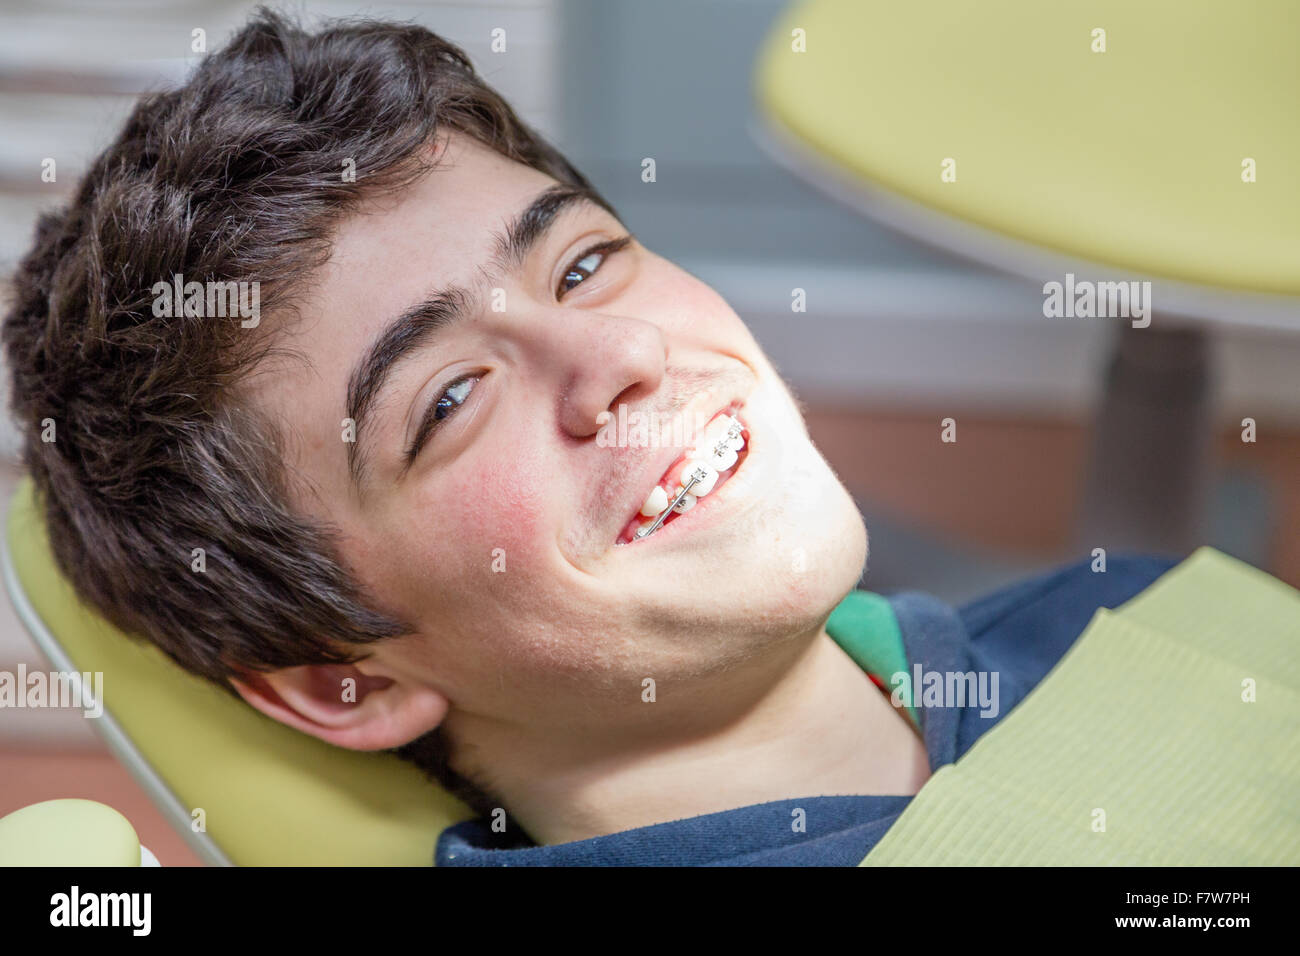 Caucasian teenager with acne skin lying on the dentist chair is smiling showing braces Stock Photo